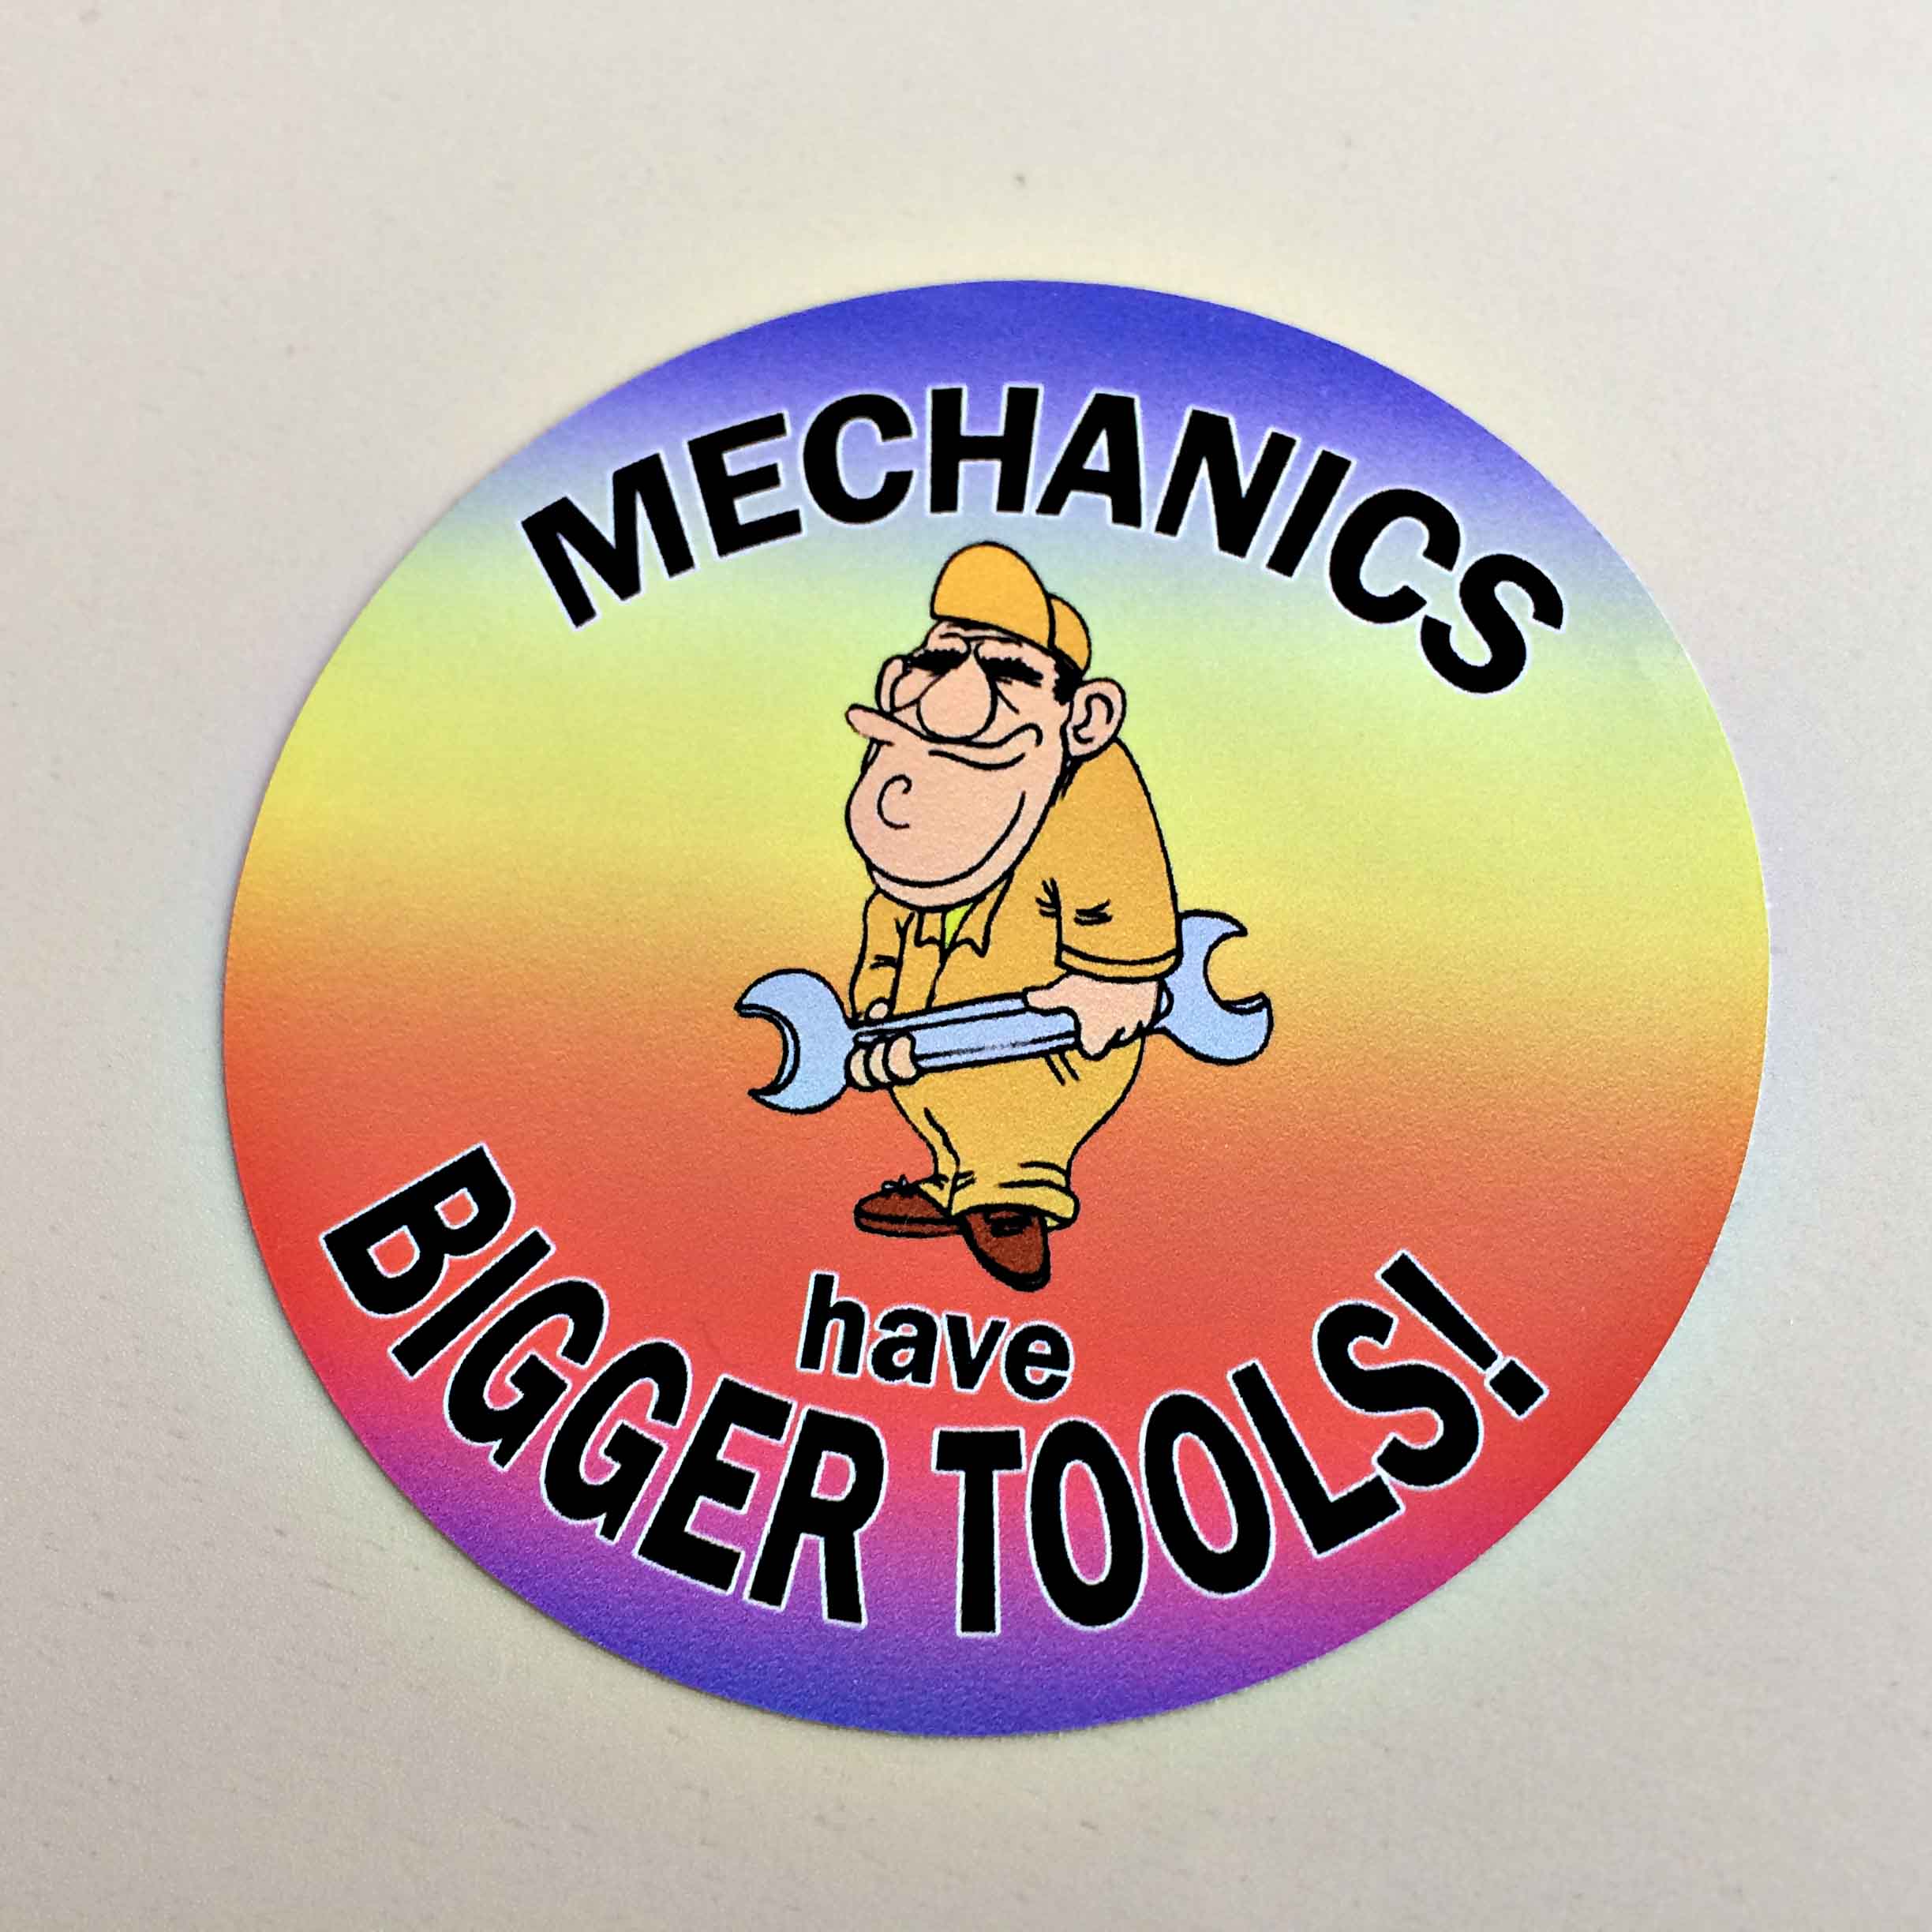 MECHANICS HAVE BIGGER TOOLS STICKER COLOUR FADE. Humorous cartoon character of a man holding a spanner on a rainbow coloured background. With the wording Mechanics Have Bigger Tools surrounding the image.